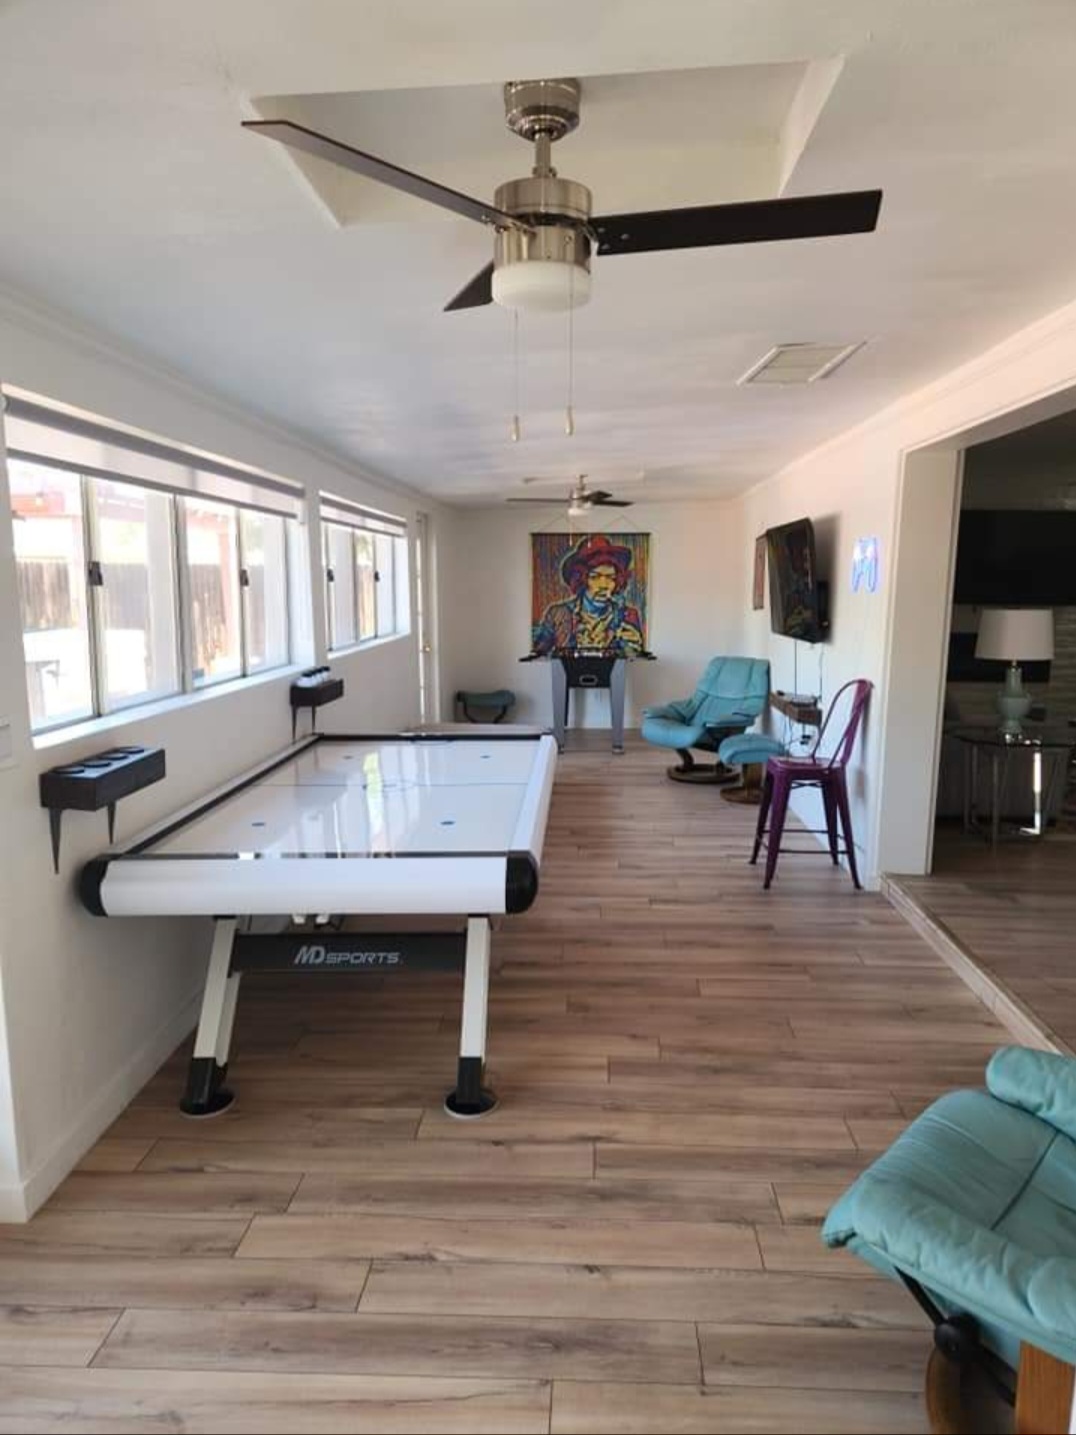 Our residential cleaning services at Voodoo Clean LLC are designed to keep your home in Tucson, AZ, sparkling clean and inviting. Whether it's a one-time deep clean or routine maintenance, we ensure your living space is a haven of cleanliness and comfort.